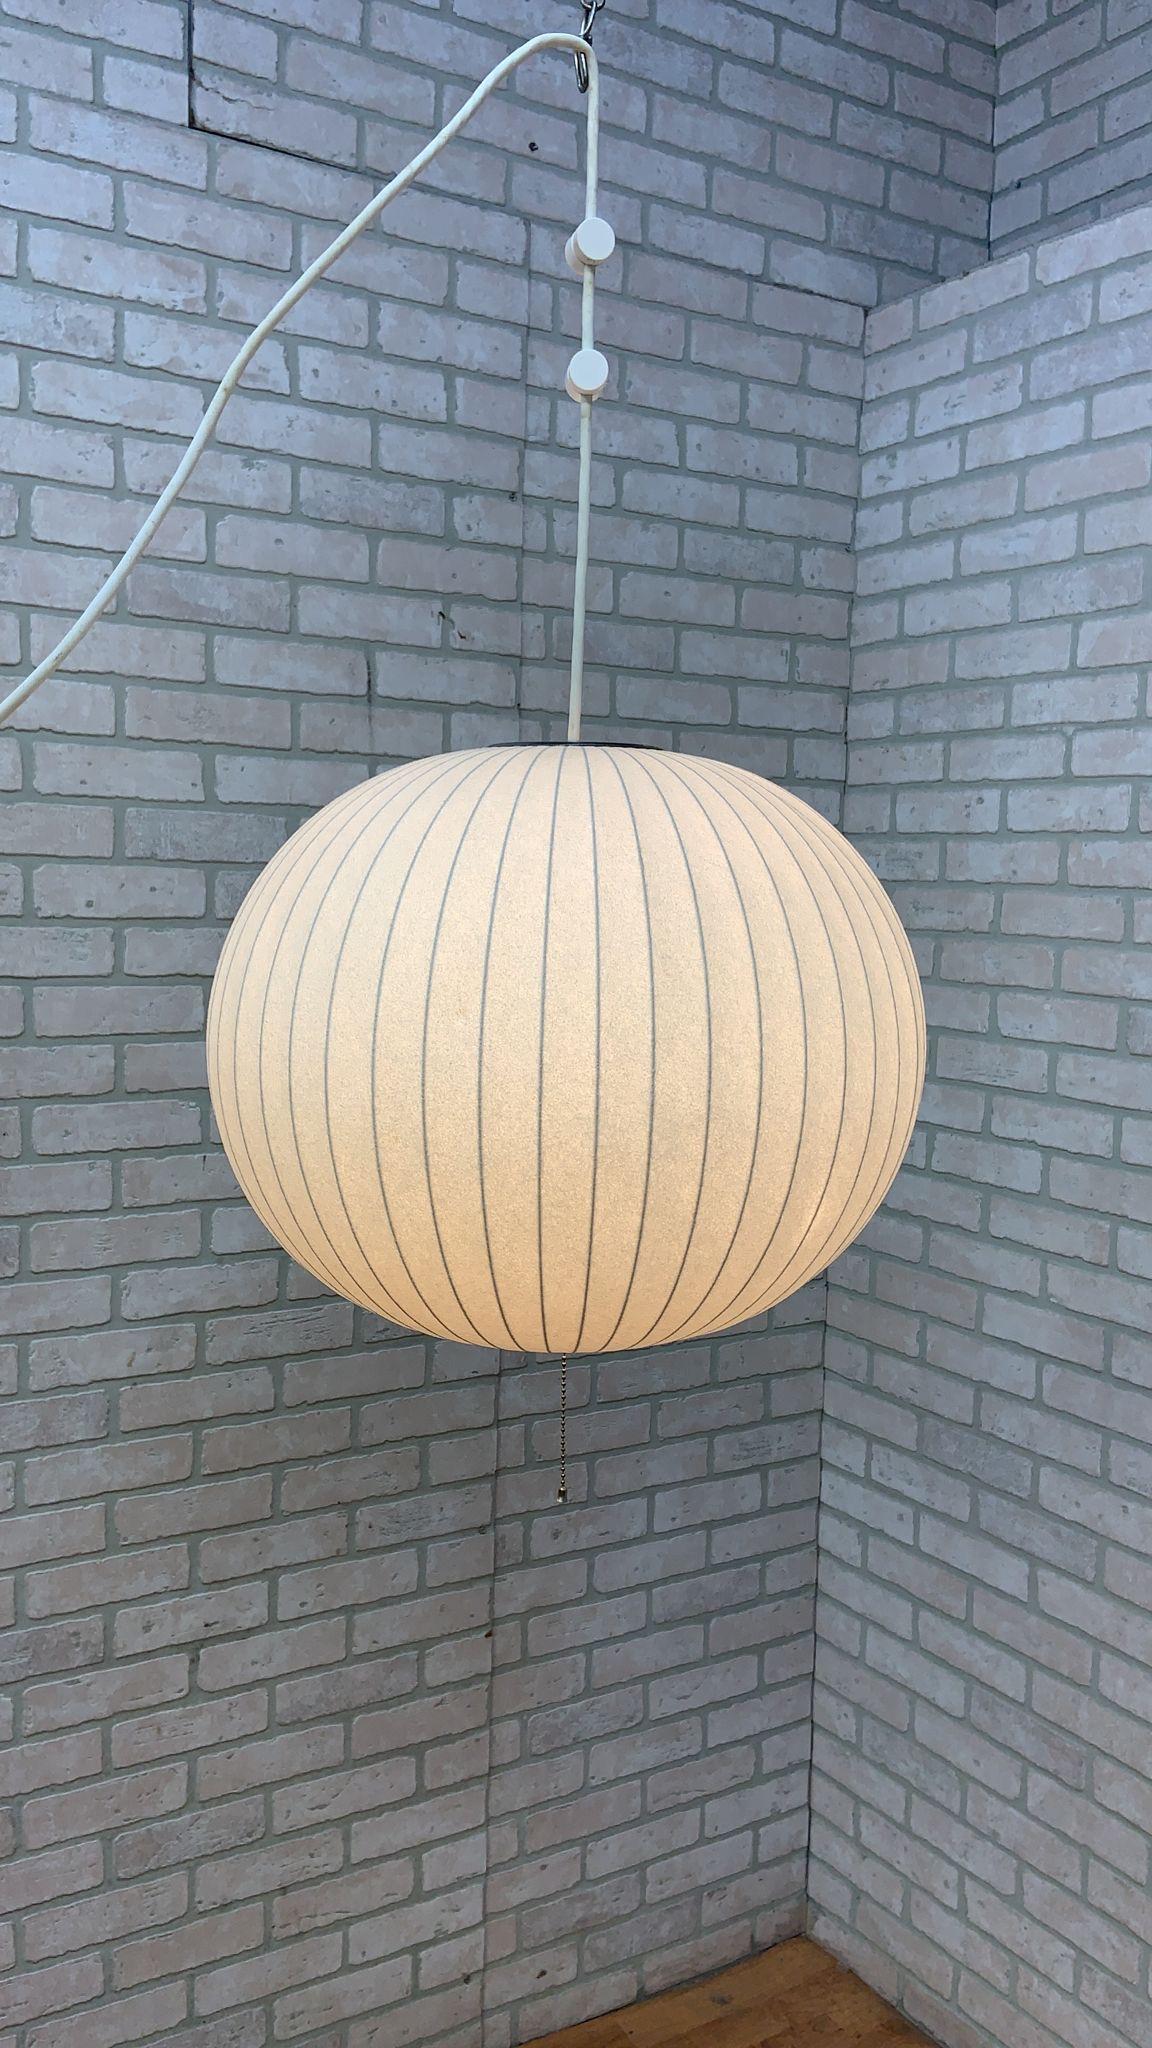 American Vintage Mid Century Modern George Nelson Ball Pendant Bubble Lamp For Sale